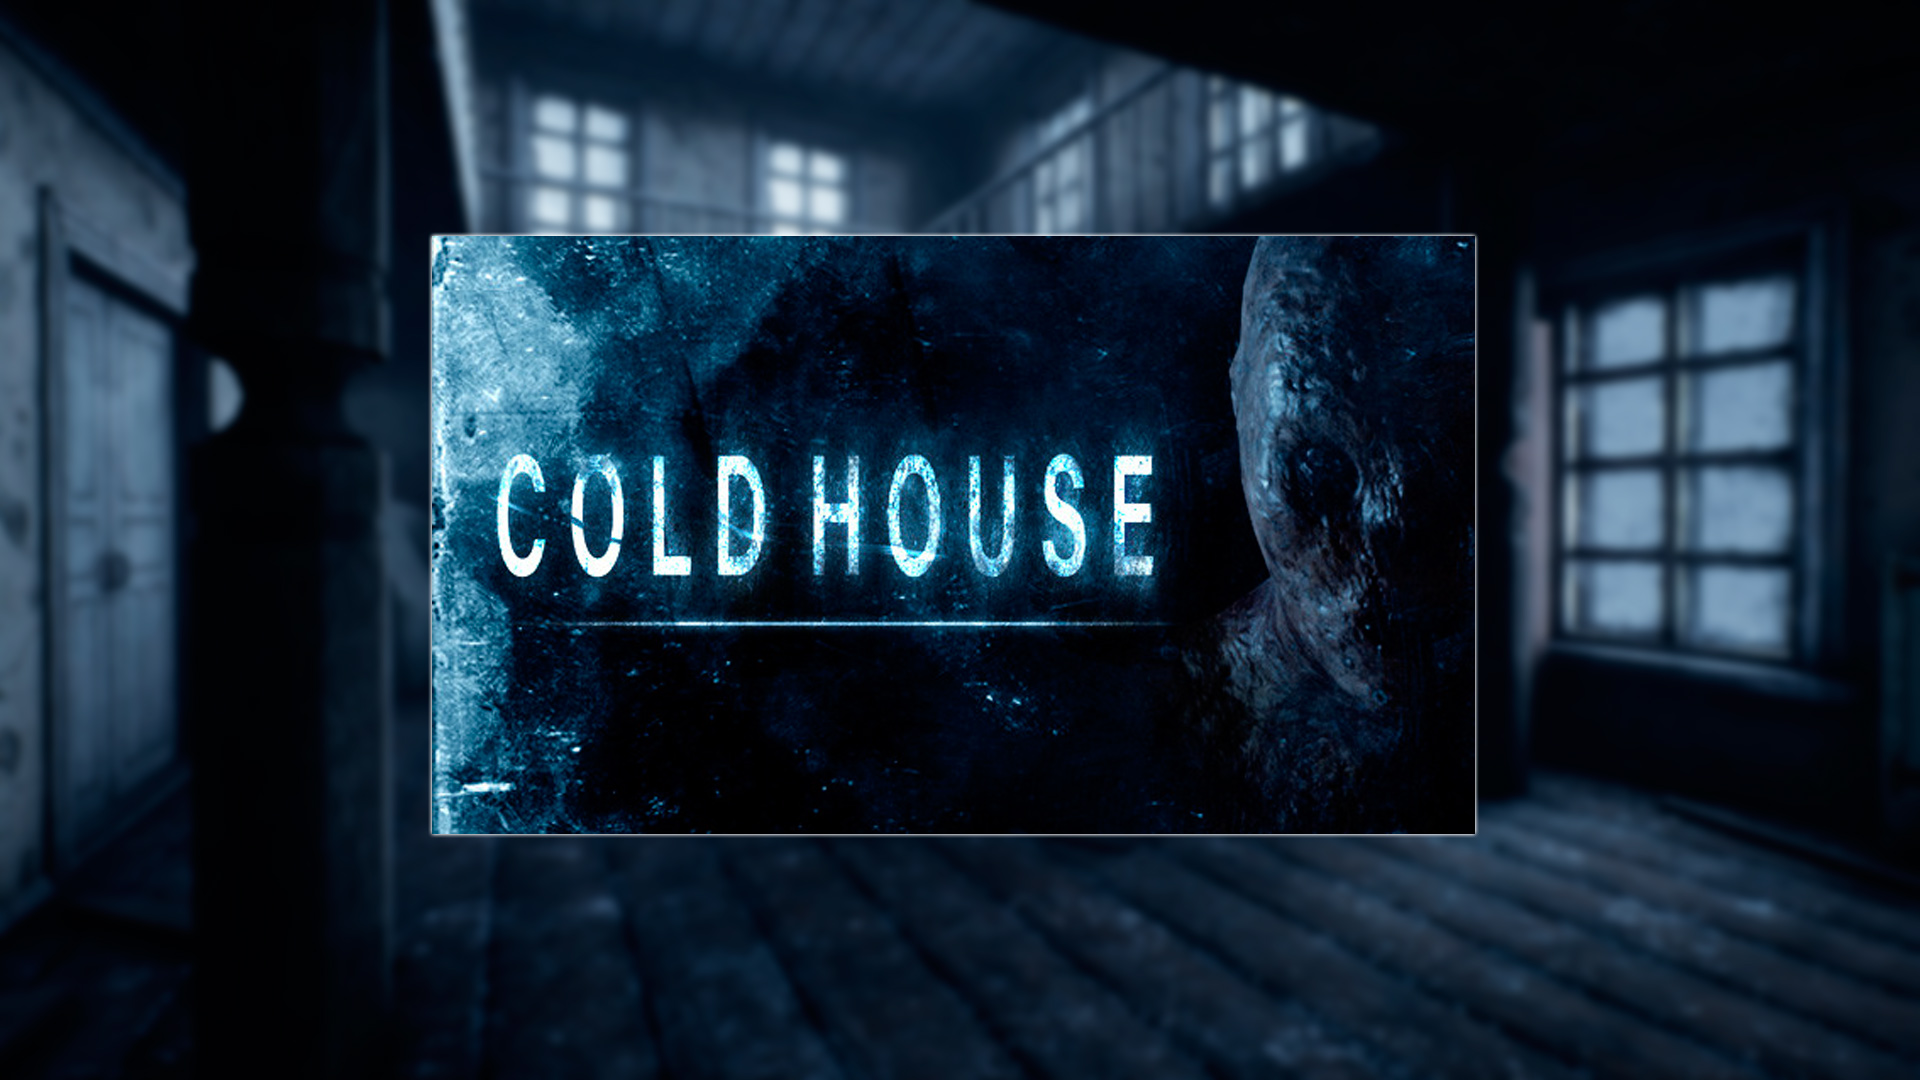 Cold House